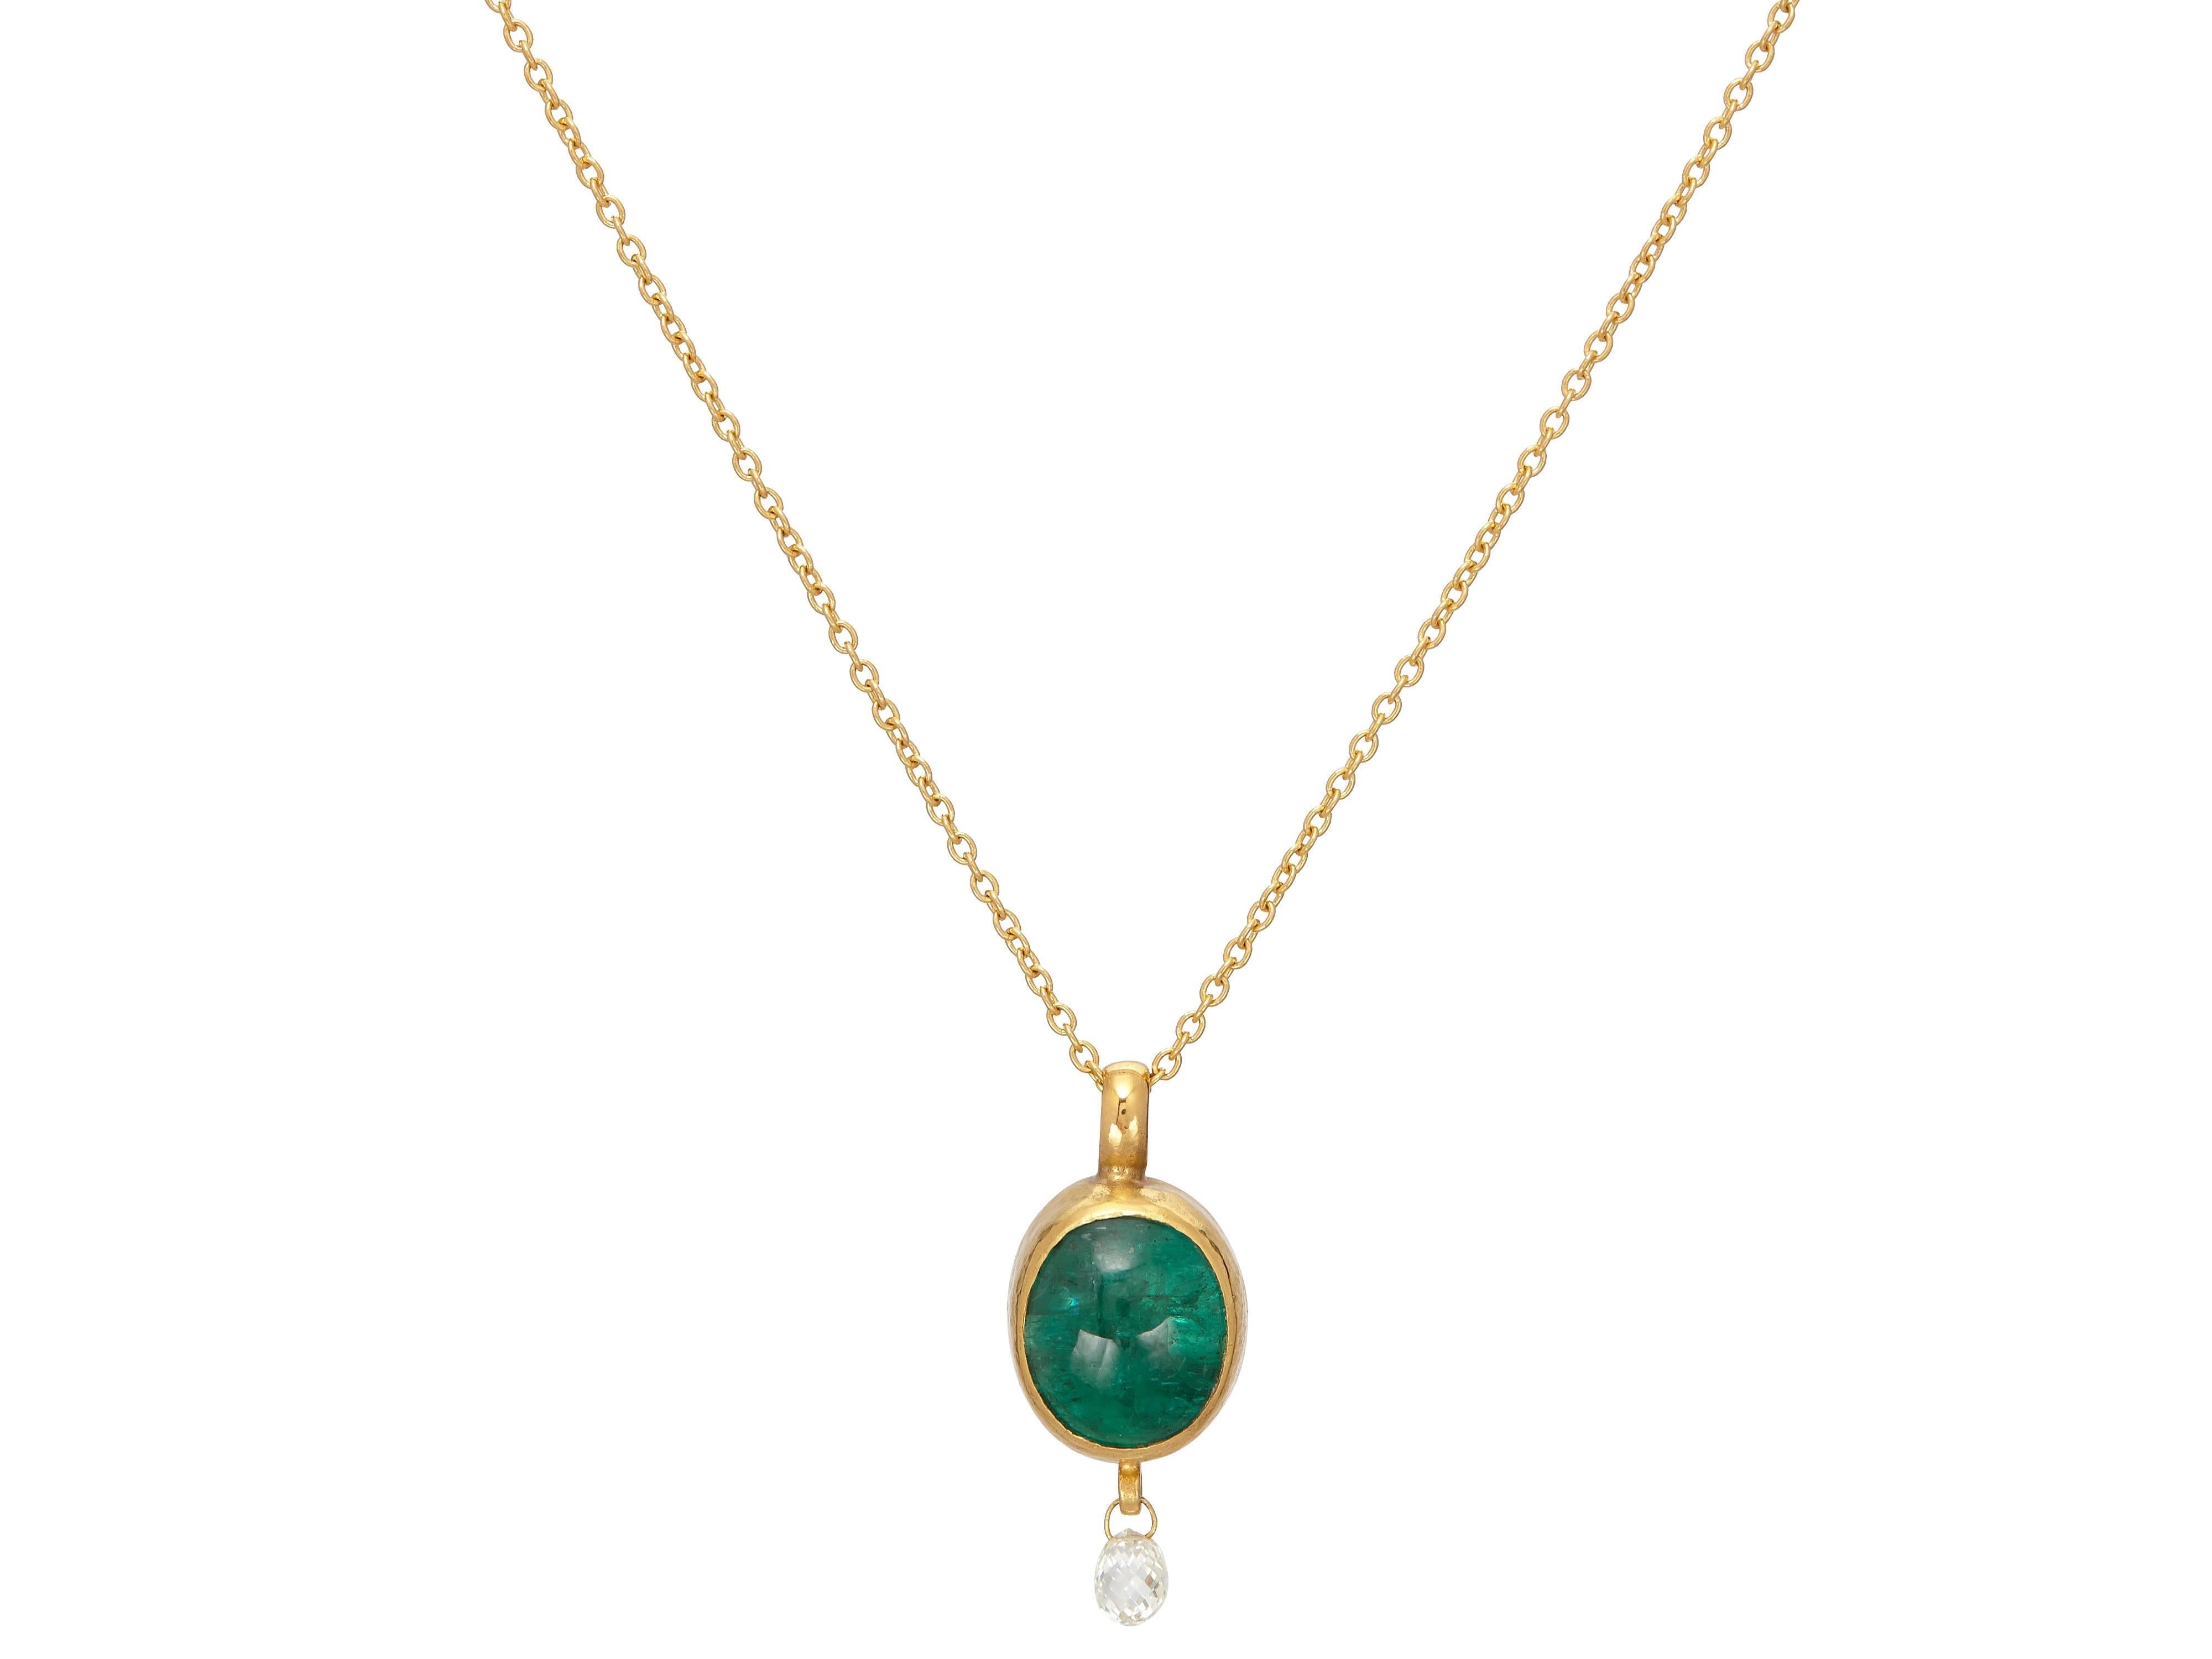 One-of-a-Kind Gold Pendant Necklace, from the Rune Collection, Green Oval Cabochon Emerald and Diamonds 0.35ct 24.5x10.5mm

“The unique quality of stones inspires my one of a kind creations. When I select a stone I usually have a vision of how I